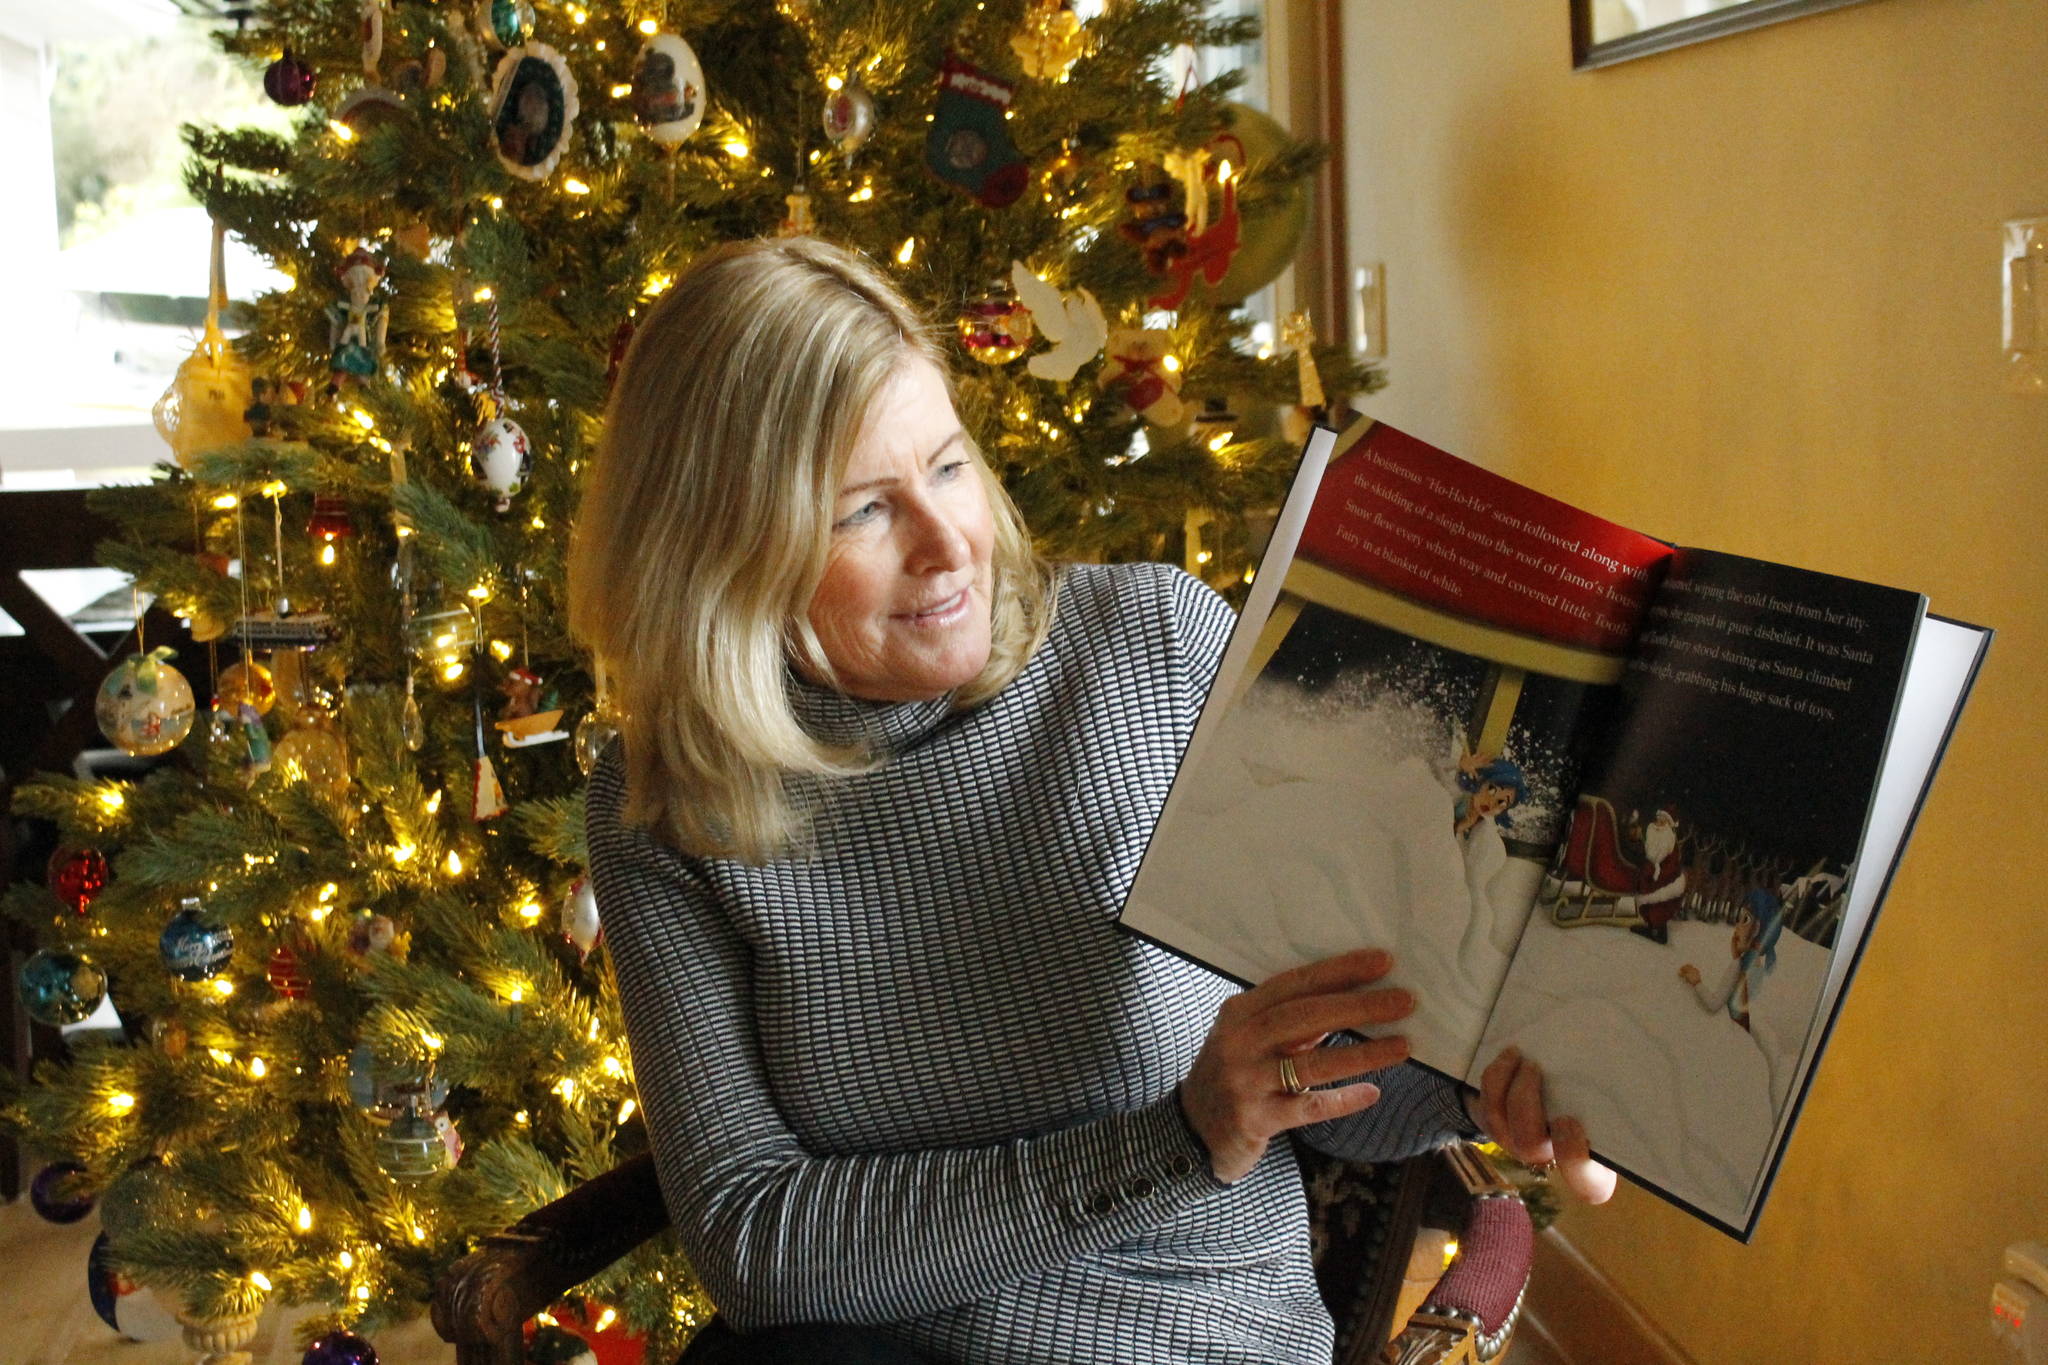 Langley author Barb DeMartino’s Christmas-themed children’s book was recently published, just in time for the holidays. “Tooth Fairy’s Jolly Adventure” was inspired by DeMartino’s six-year-old grandson, who lost a tooth on Christmas Eve last year. Photo by Kira Erickson/South Whidbey Record